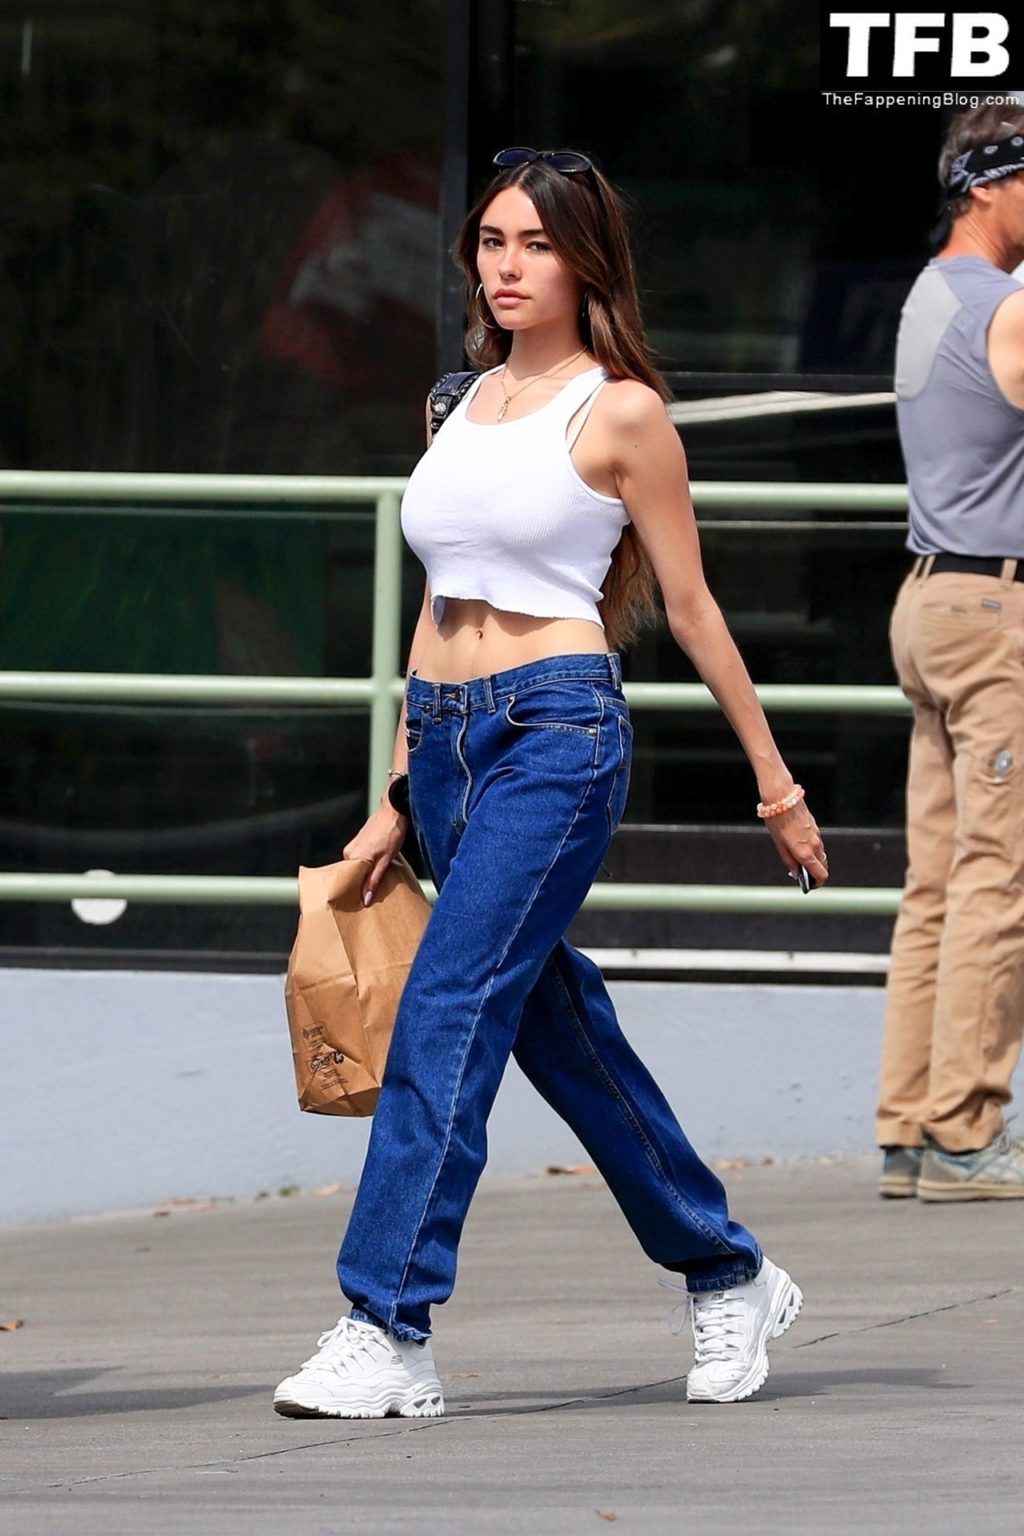 Madison Beer Sexy The Fappening Blog 6 1 1024x1536 - Madison Beer Wears a Tiny Crop Top Revealing a Toned Waist While Shopping in LA (39 Photos)